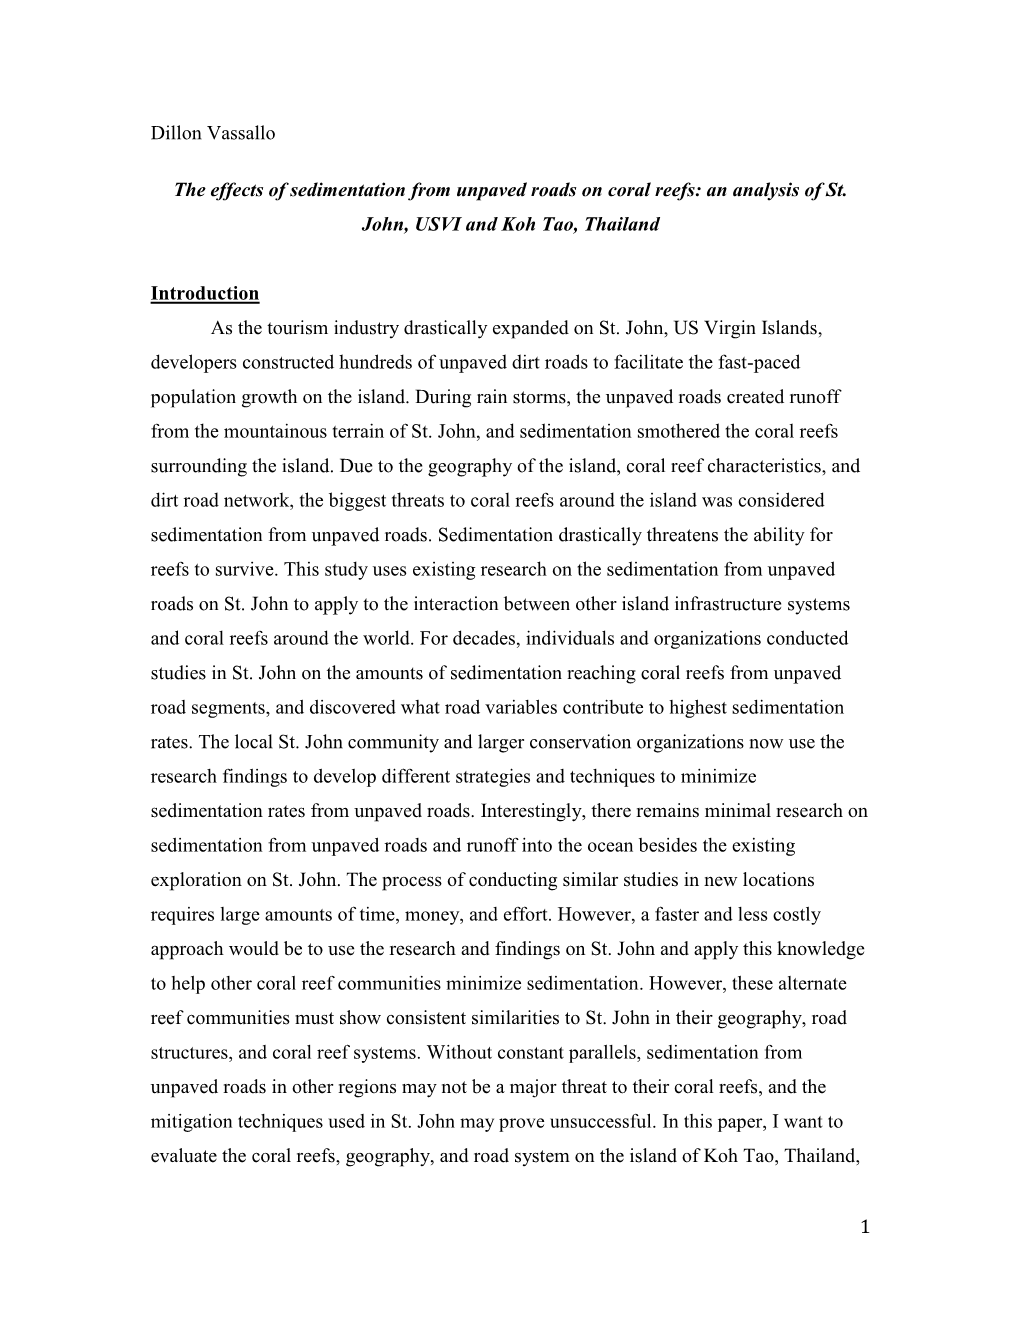 1 Dillon Vassallo the Effects of Sedimentation from Unpaved Roads on Coral Reefs: an Analysis of St. John, USVI and Koh Tao